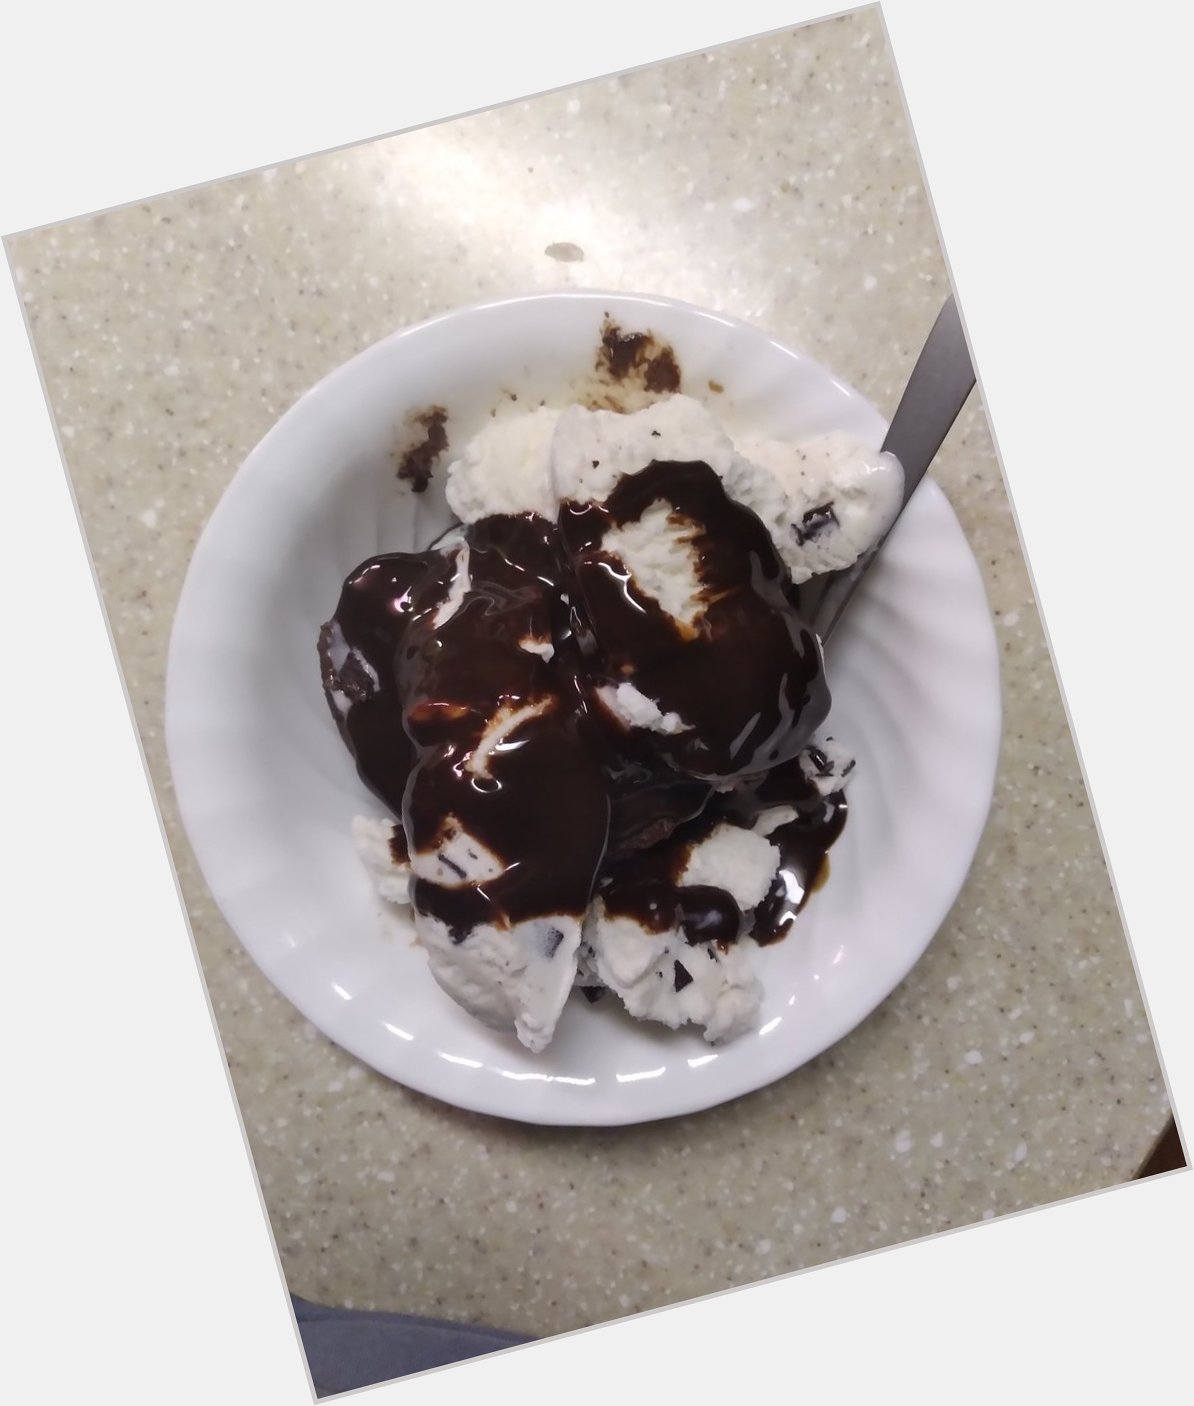  Happy birthday John King, here\s a chocolate cake with ice cream to top it off with chocolate syrup 